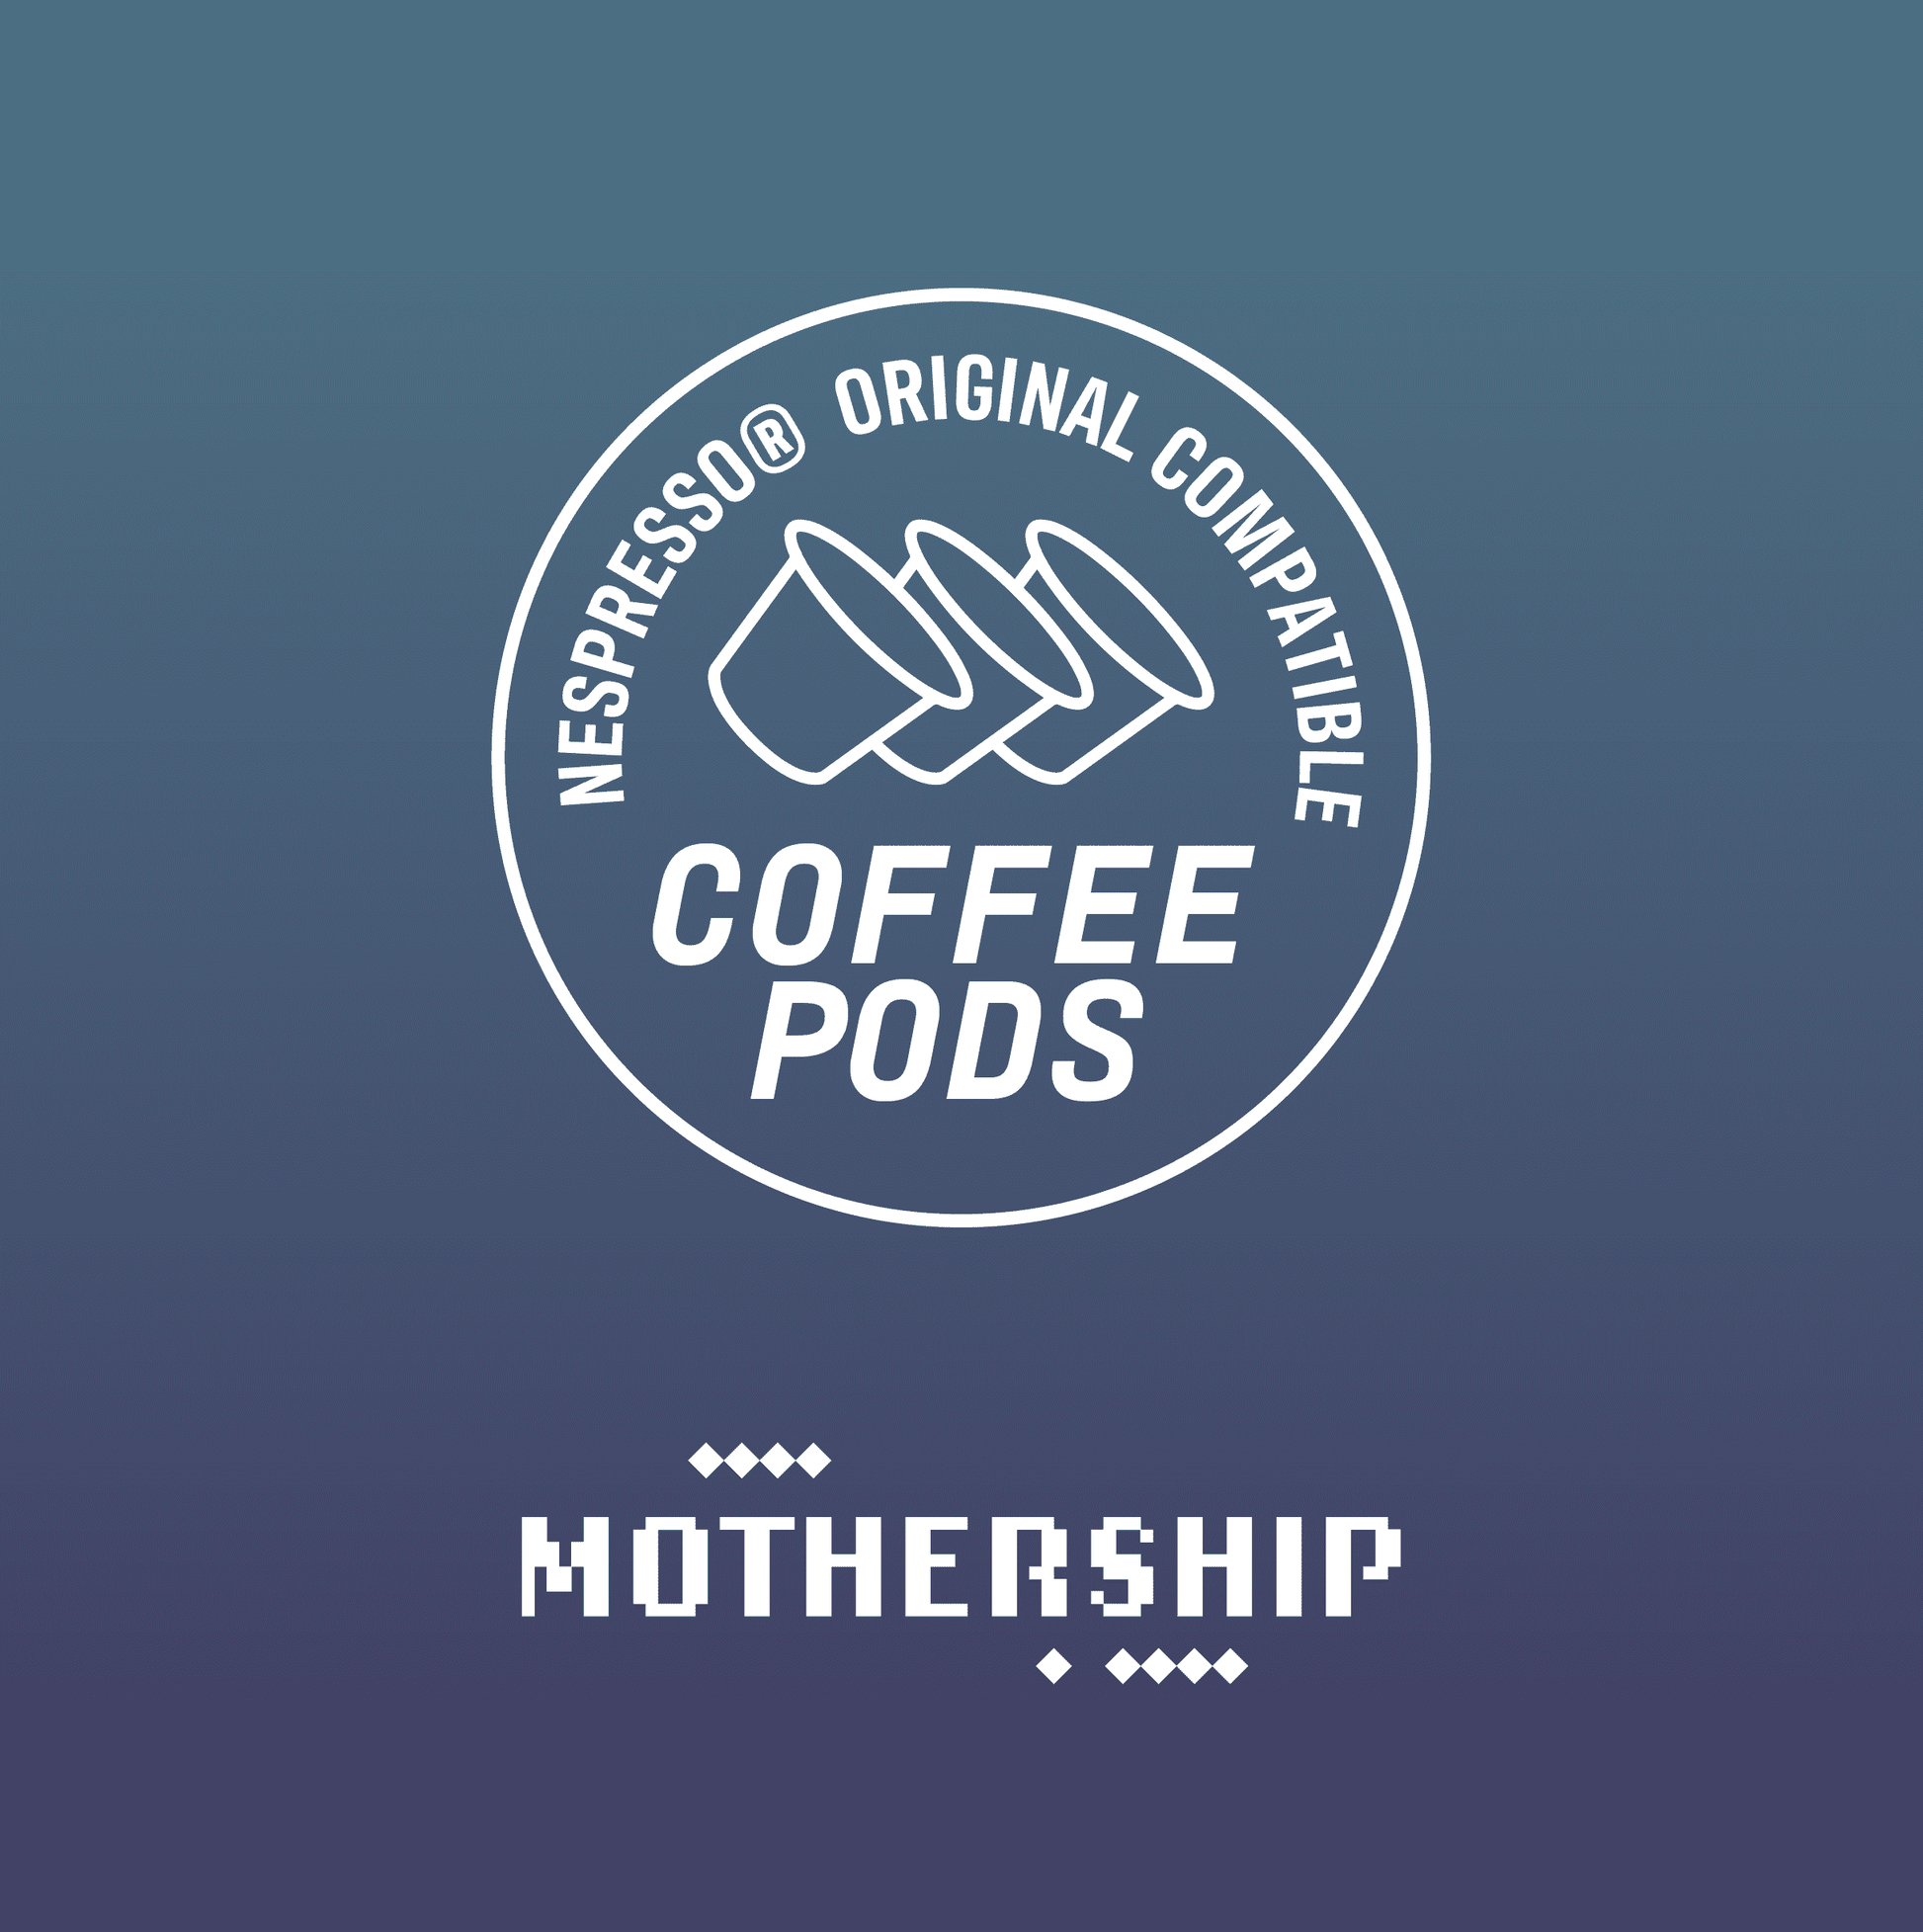 Mothership Blend - 20 Pods Subscription - 12 Months - Weekly Delivery.